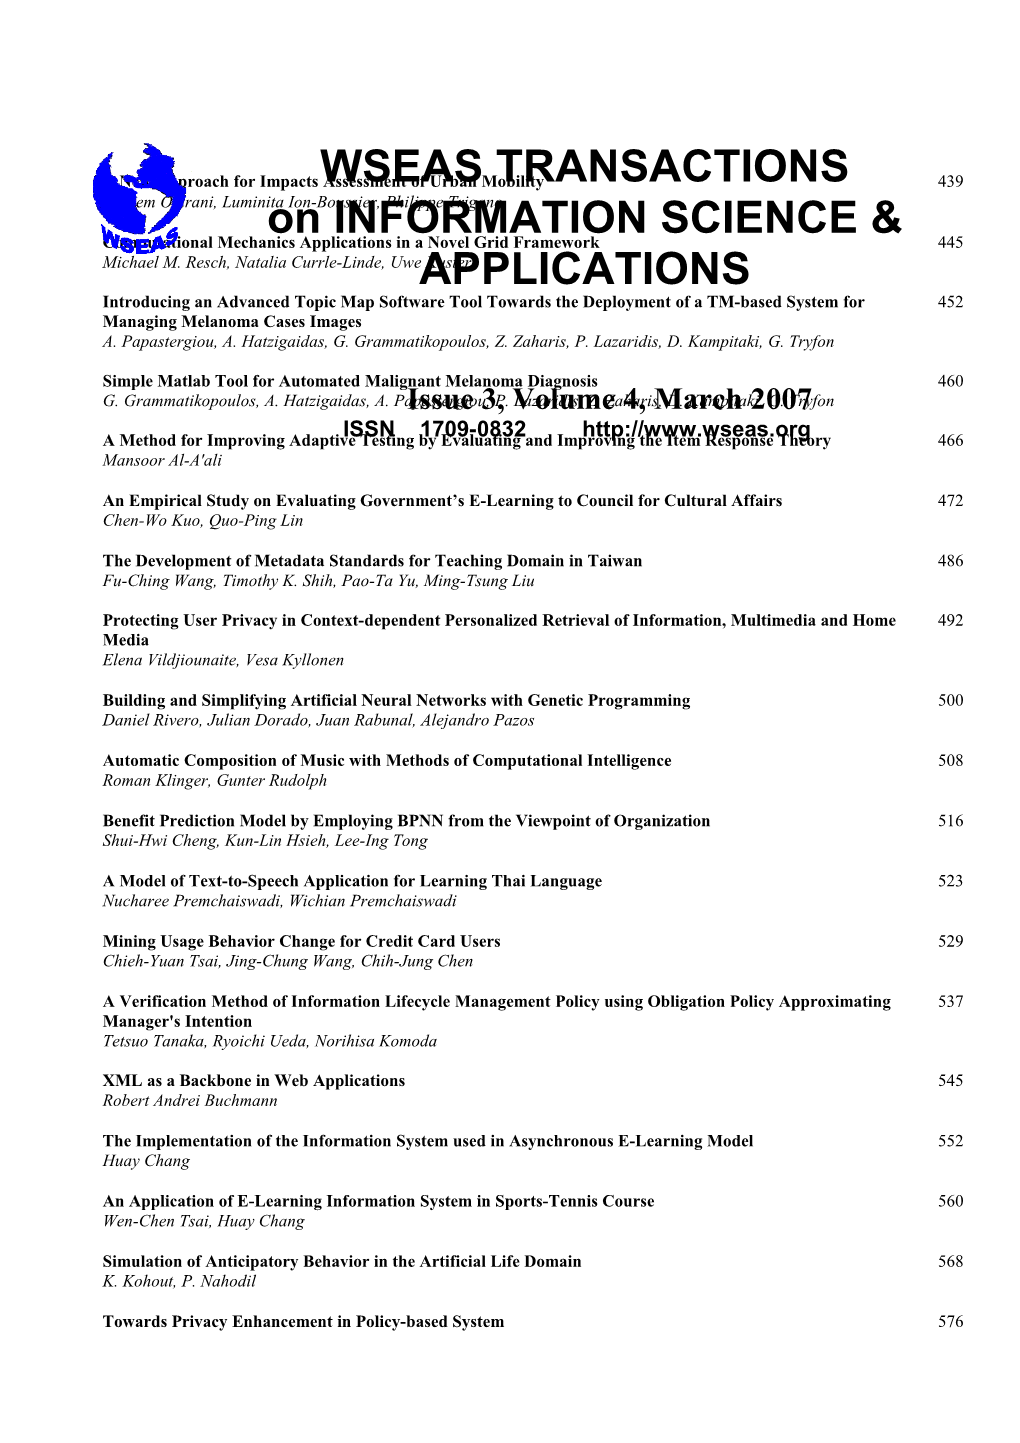 WSEAS Trans. on INFORMATION SCIENCE & APPLICATIONS, March 2007